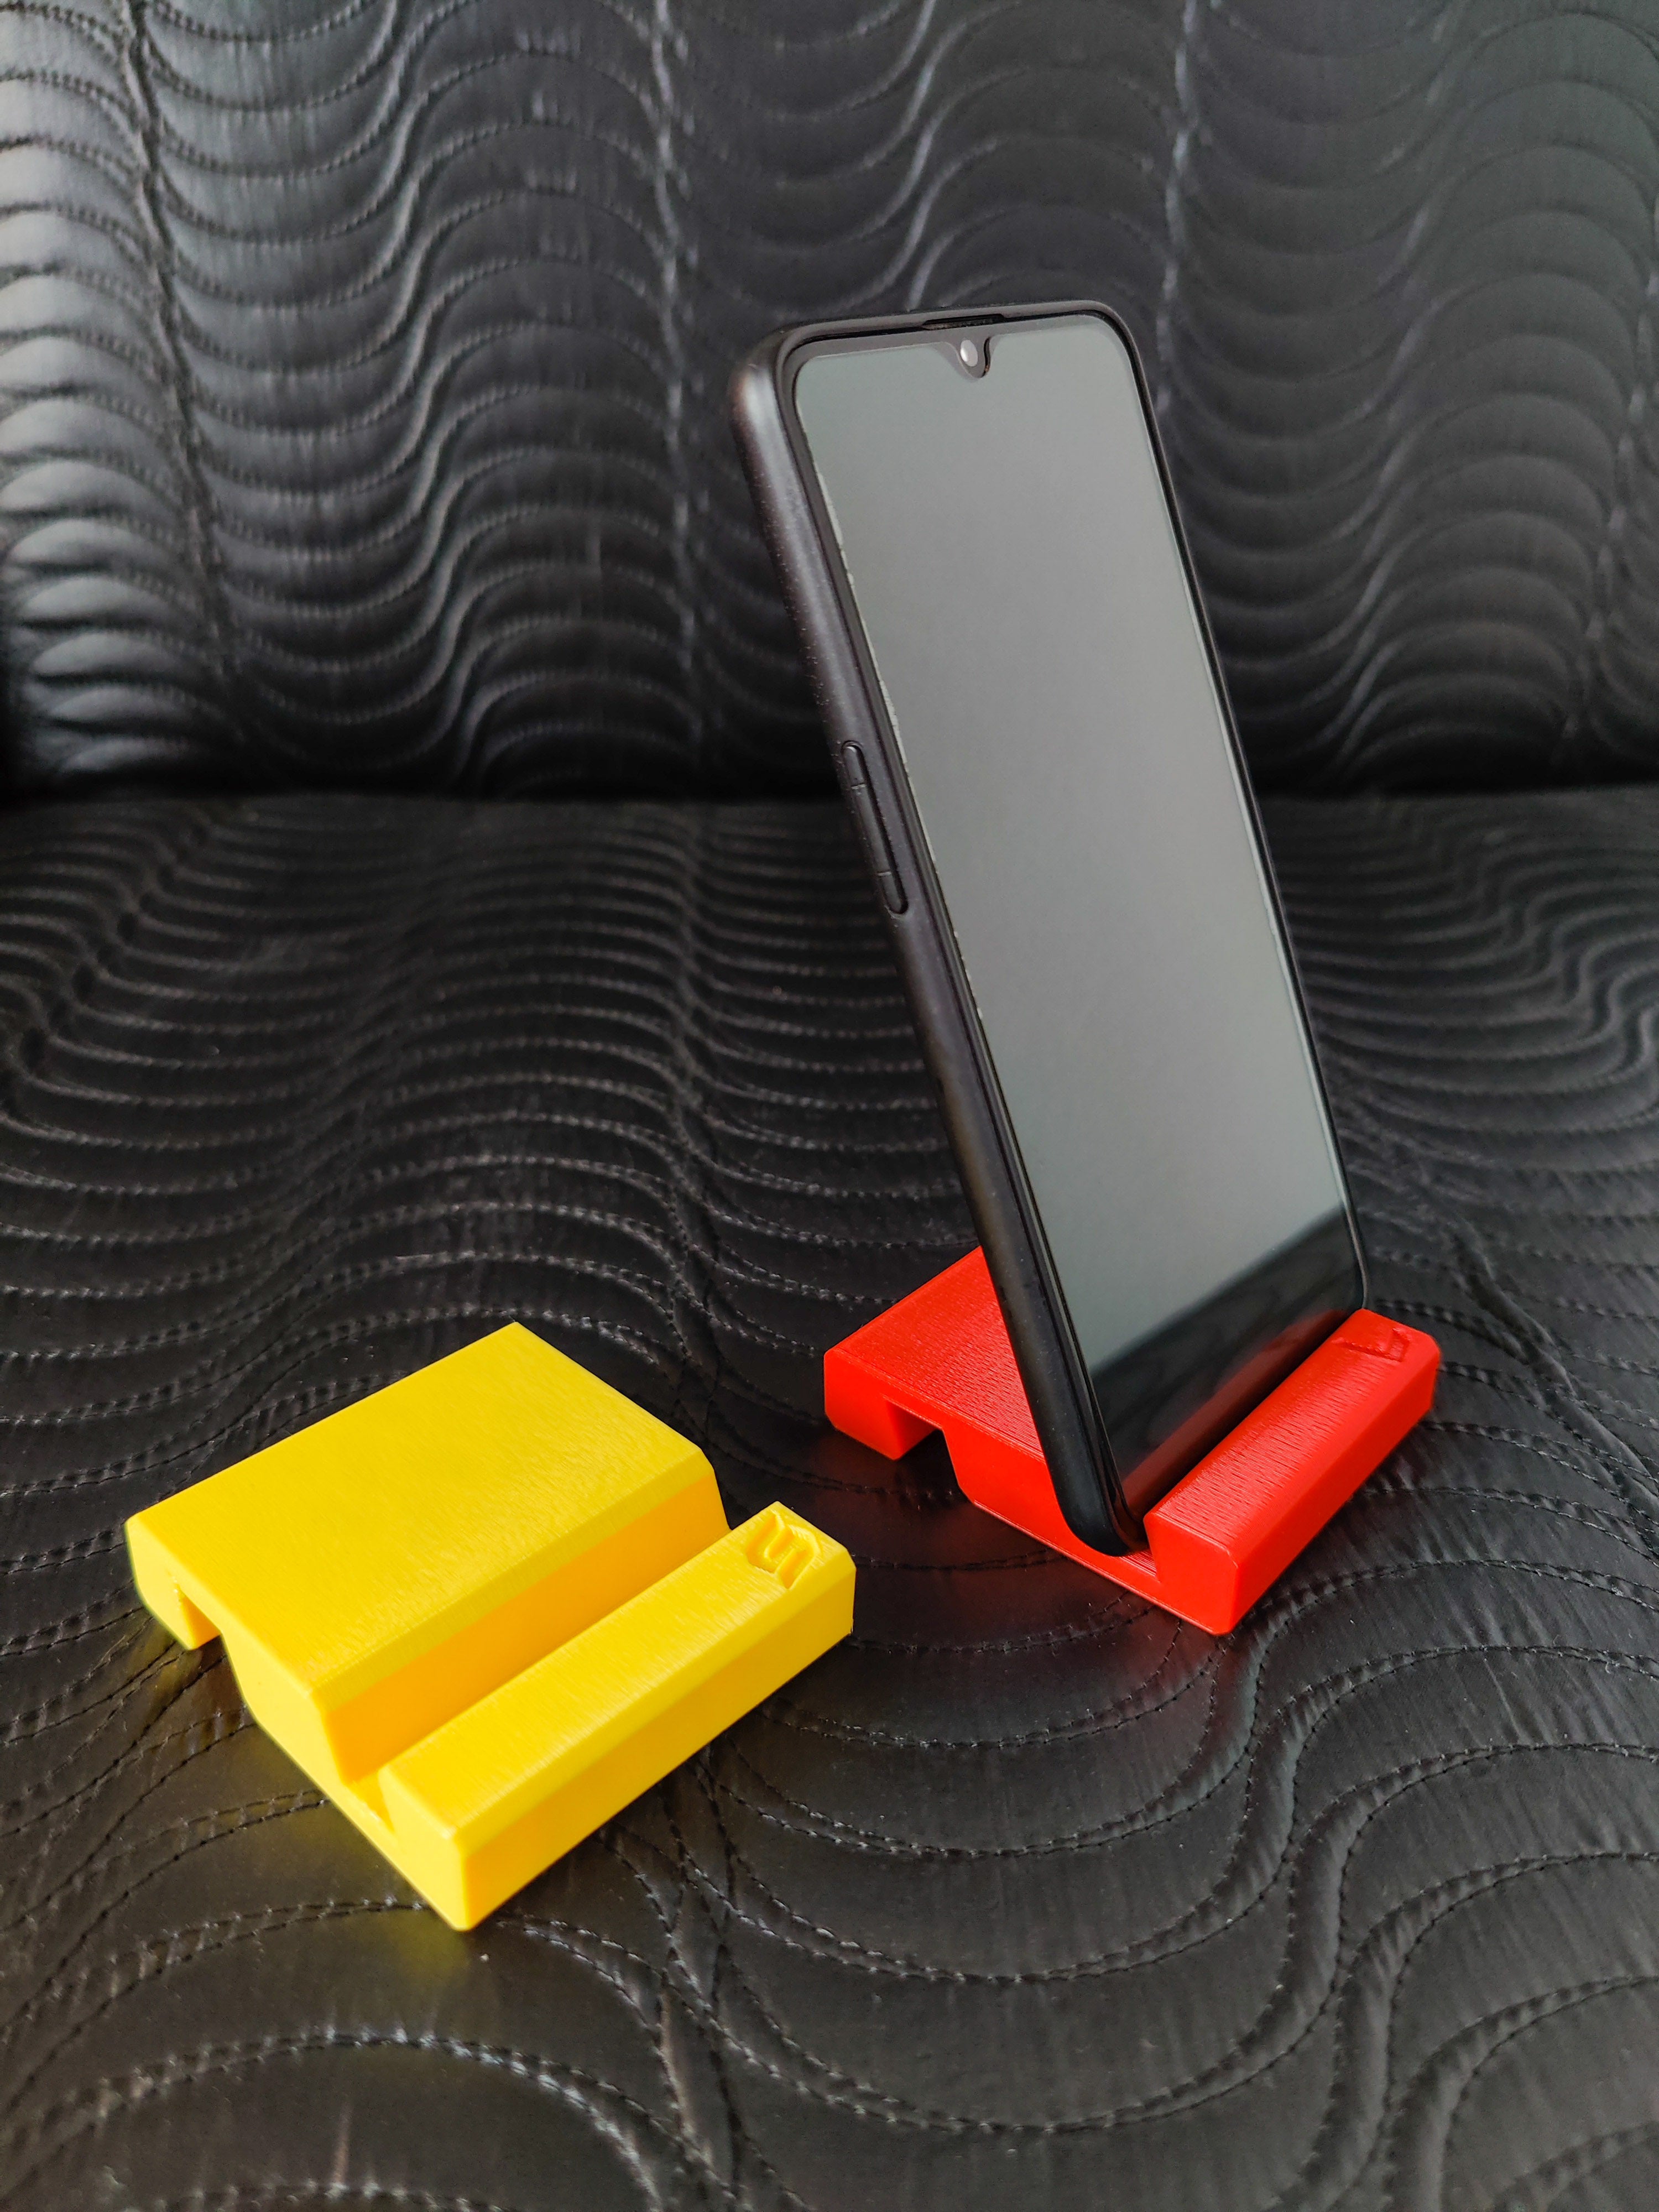 Phone stand with adjustable gap for different mobile phones